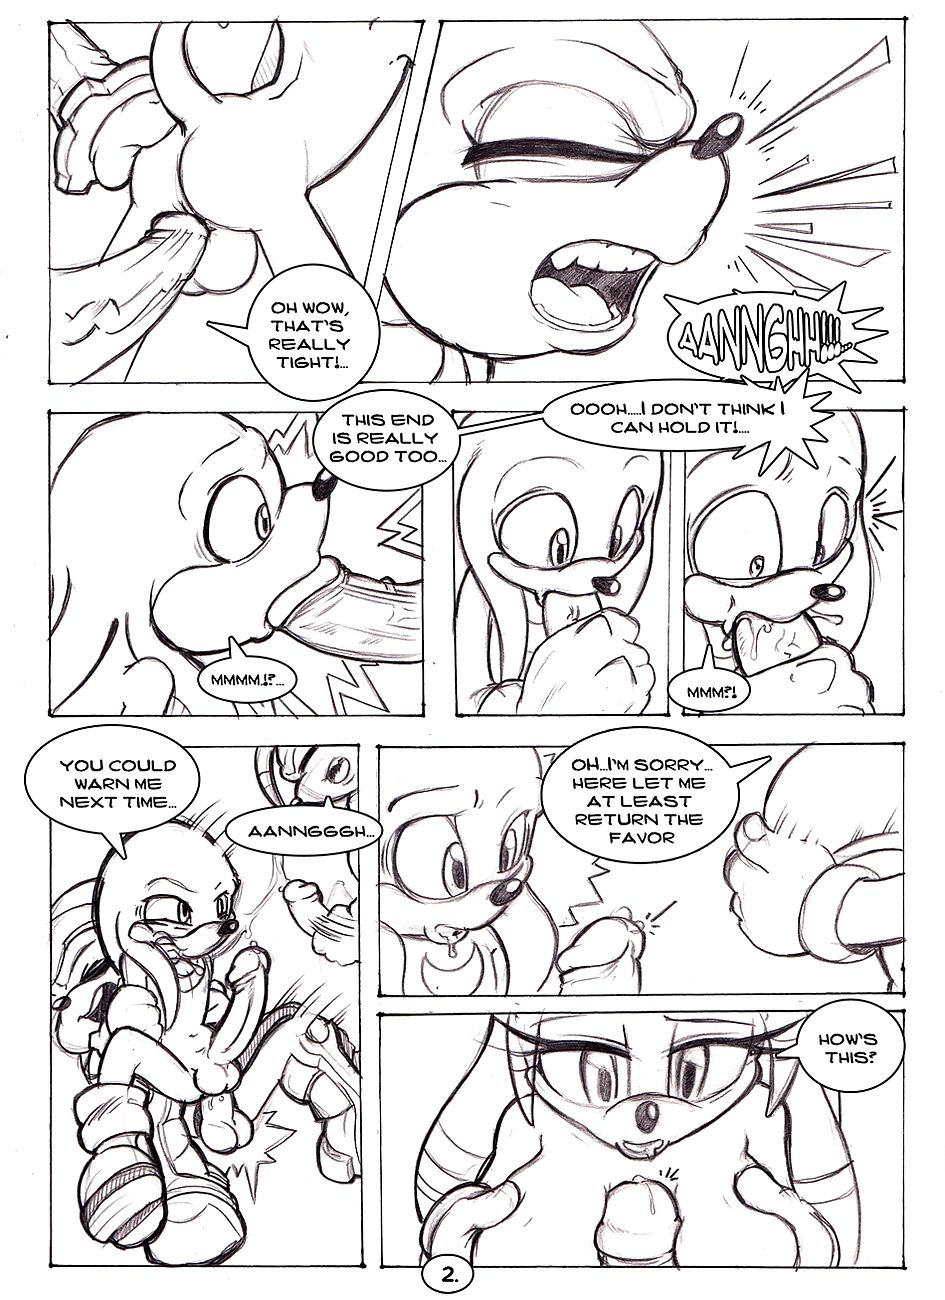 Happy Accidents 1 page 1